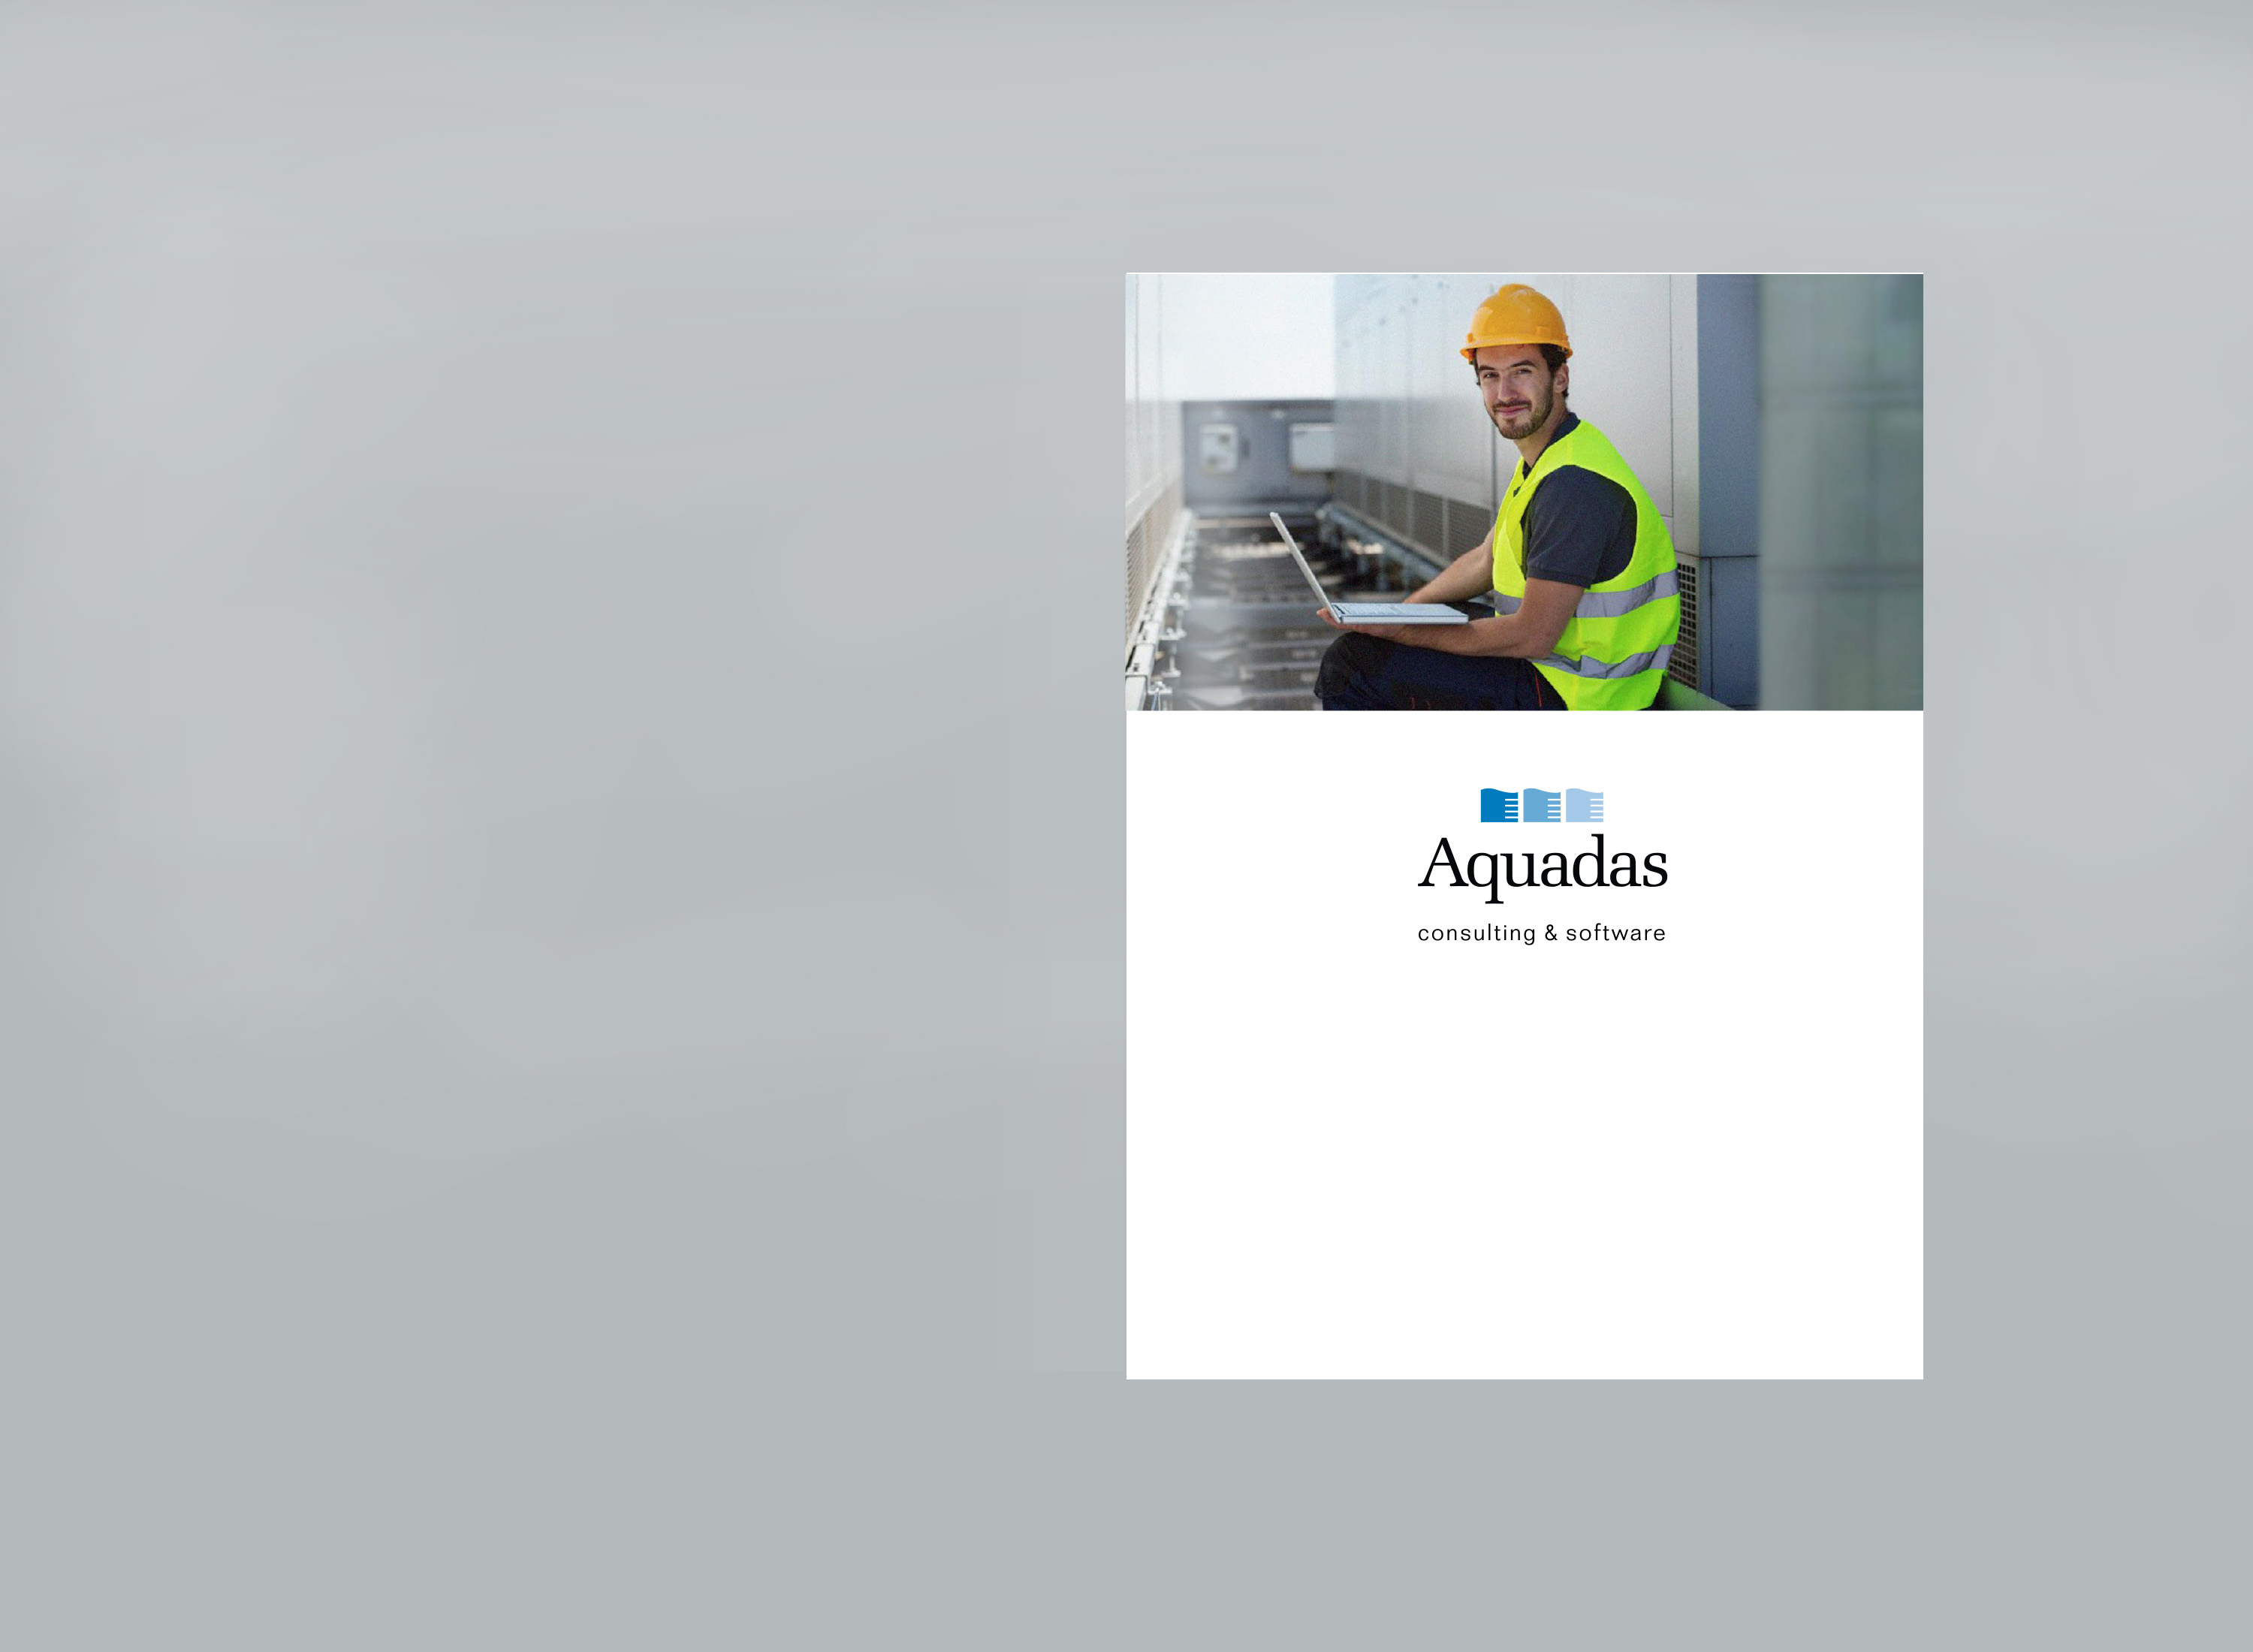 Cover of folder. Photo of worker with laptop.